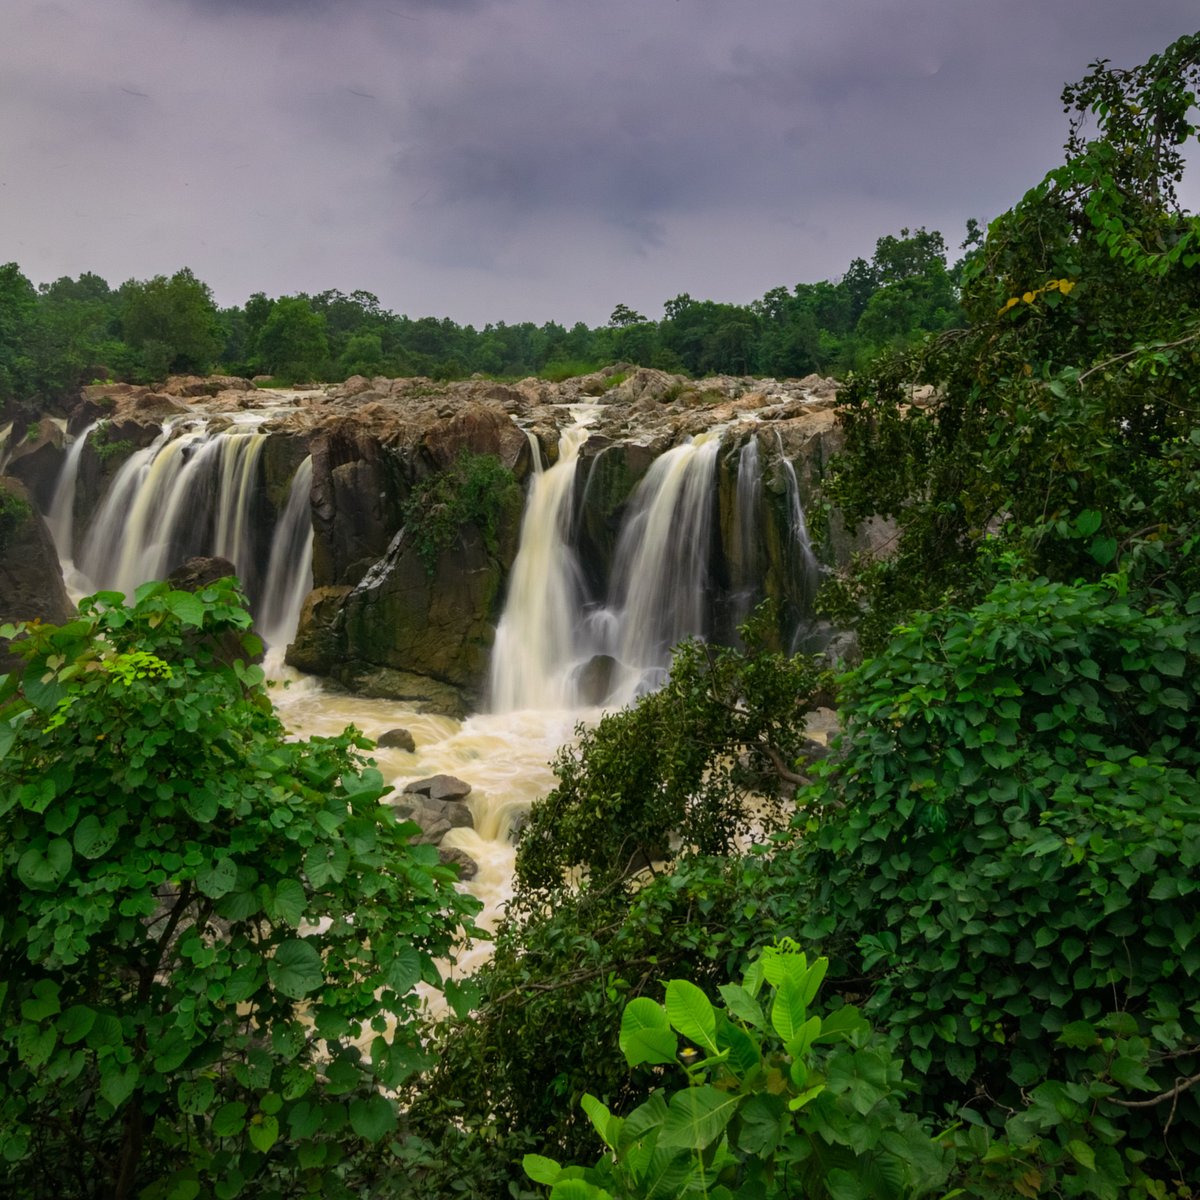 keonjhar tourism contact number